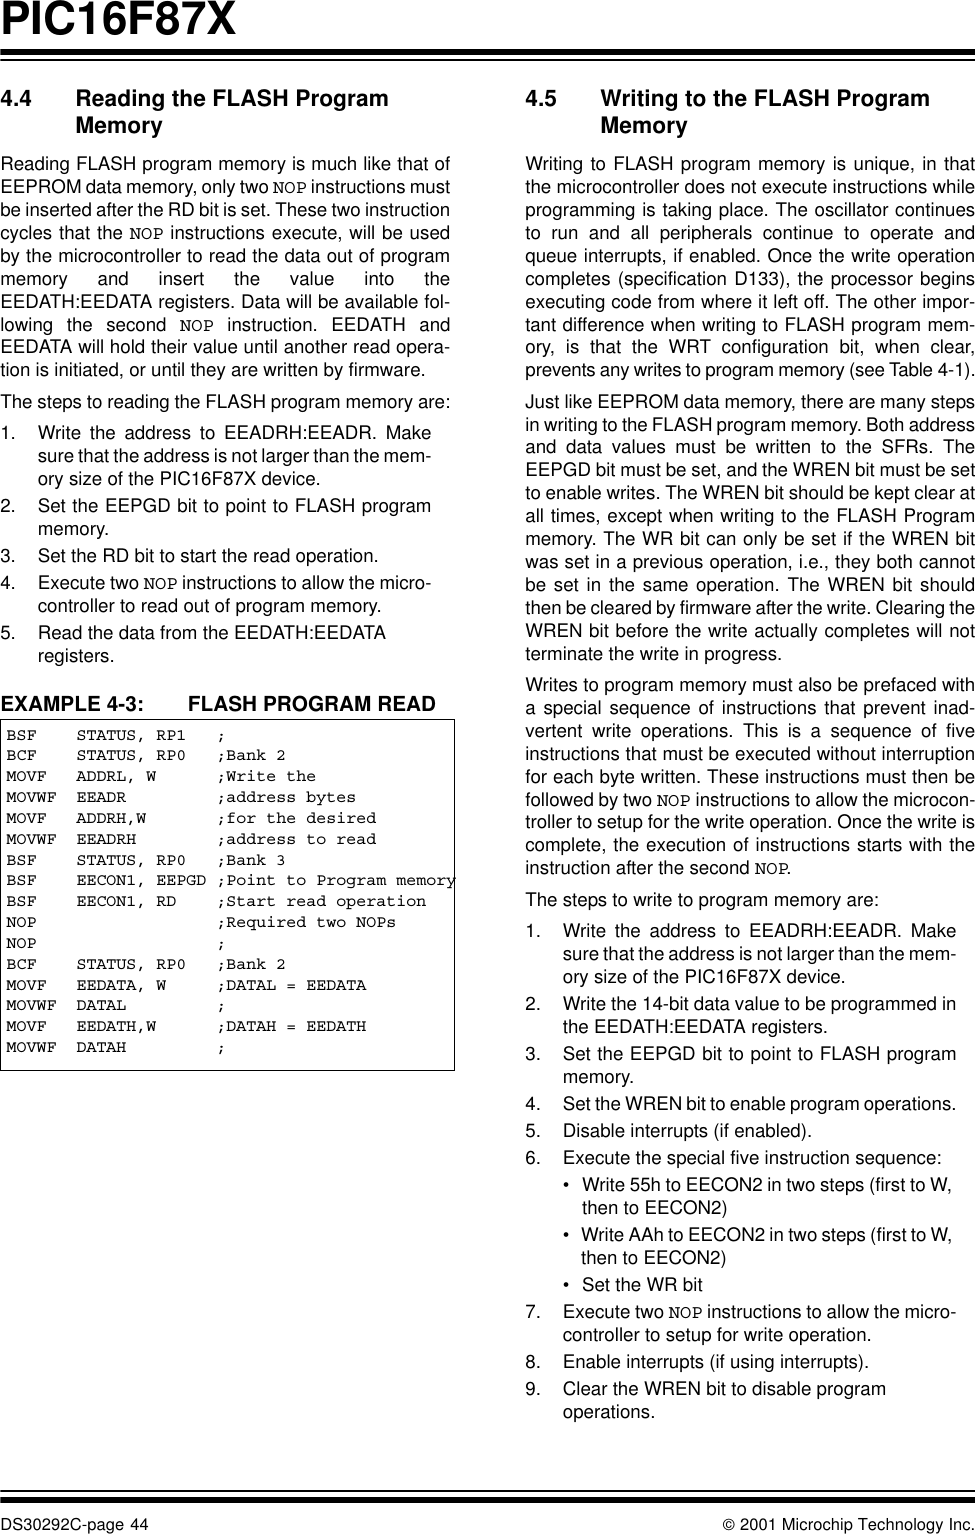 PIC16F87XDS30292C-page 44  2001 Microchip Technology Inc.4.4 Reading the FLASH Program MemoryReading FLASH program memory is much like that ofEEPROM data memory, only two NOP instructions mustbe inserted after the RD bit is set. These two instructioncycles that the NOP instructions execute, will be usedby the microcontroller to read the data out of programmemory and insert the value into theEEDATH:EEDATA registers. Data will be available fol-lowing the second NOP instruction. EEDATH andEEDATA will hold their value until another read opera-tion is initiated, or until they are written by firmware. The steps to reading the FLASH program memory are:1. Write the address to EEADRH:EEADR. Makesure that the address is not larger than the mem-ory size of the PIC16F87X device.2. Set the EEPGD bit to point to FLASH programmemory.3. Set the RD bit to start the read operation.4. Execute two NOP instructions to allow the micro-controller to read out of program memory.5. Read the data from the EEDATH:EEDATA registers.EXAMPLE 4-3: FLASH PROGRAM READ4.5 Writing to the FLASH Program MemoryWriting to FLASH program memory is unique, in thatthe microcontroller does not execute instructions whileprogramming is taking place. The oscillator continuesto run and all peripherals continue to operate andqueue interrupts, if enabled. Once the write operationcompletes (specification D133), the processor beginsexecuting code from where it left off. The other impor-tant difference when writing to FLASH program mem-ory, is that the WRT configuration bit, when clear,prevents any writes to program memory (see Table 4-1).Just like EEPROM data memory, there are many stepsin writing to the FLASH program memory. Both addressand data values must be written to the SFRs. TheEEPGD bit must be set, and the WREN bit must be setto enable writes. The WREN bit should be kept clear atall times, except when writing to the FLASH Programmemory. The WR bit can only be set if the WREN bitwas set in a previous operation, i.e., they both cannotbe set in the same operation. The WREN bit shouldthen be cleared by firmware after the write. Clearing theWREN bit before the write actually completes will notterminate the write in progress. Writes to program memory must also be prefaced witha special sequence of instructions that prevent inad-vertent write operations. This is a sequence of fiveinstructions that must be executed without interruptionfor each byte written. These instructions must then befollowed by two NOP instructions to allow the microcon-troller to setup for the write operation. Once the write iscomplete, the execution of instructions starts with theinstruction after the second NOP.The steps to write to program memory are:1. Write the address to EEADRH:EEADR. Makesure that the address is not larger than the mem-ory size of the PIC16F87X device.2. Write the 14-bit data value to be programmed inthe EEDATH:EEDATA registers.3. Set the EEPGD bit to point to FLASH programmemory.4. Set the WREN bit to enable program operations.5. Disable interrupts (if enabled).6. Execute the special five instruction sequence:•Write 55h to EECON2 in two steps (first to W, then to EECON2)•Write AAh to EECON2 in two steps (first to W, then to EECON2)•Set the WR bit7. Execute two NOP instructions to allow the micro-controller to setup for write operation.8. Enable interrupts (if using interrupts).9. Clear the WREN bit to disable program operations.BSF    STATUS, RP1   ;BCF    STATUS, RP0   ;Bank 2MOVF   ADDRL, W      ;Write theMOVWF  EEADR         ;address bytesMOVF   ADDRH,W       ;for the desiredMOVWF  EEADRH        ;address to readBSF    STATUS, RP0   ;Bank 3BSF    EECON1, EEPGD ;Point to Program memoryBSF    EECON1, RD    ;Start read operationNOP                  ;Required two NOPsNOP                  ;BCF    STATUS, RP0   ;Bank 2MOVF   EEDATA, W     ;DATAL = EEDATAMOVWF  DATAL         ;MOVF   EEDATH,W      ;DATAH = EEDATHMOVWF  DATAH         ;